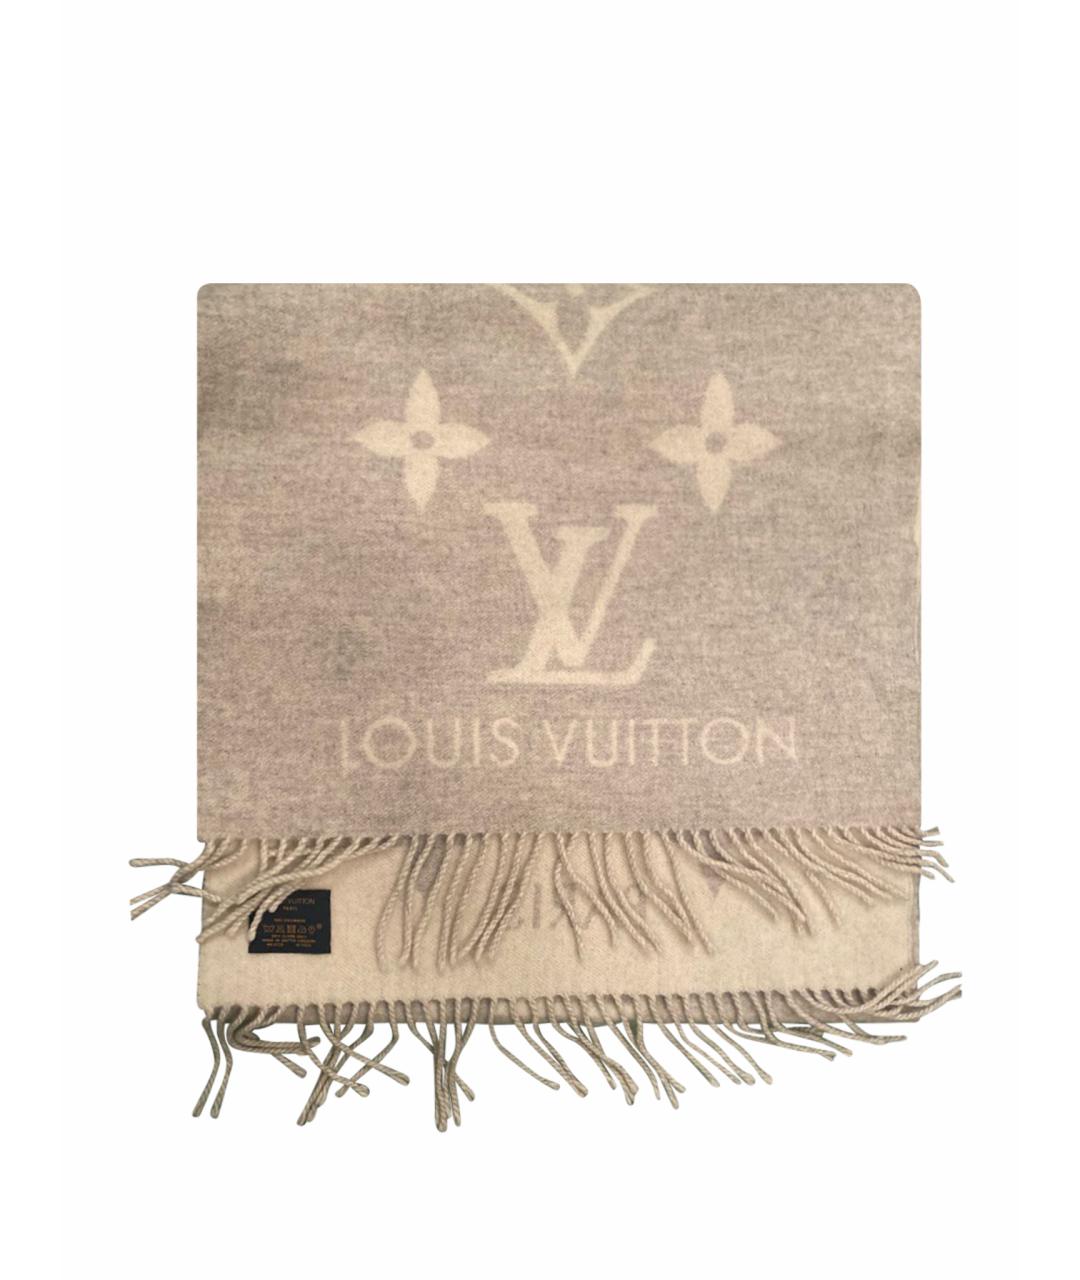 LOUIS VUITTON PRE-OWNED Серый кашемировый шарф, фото 1